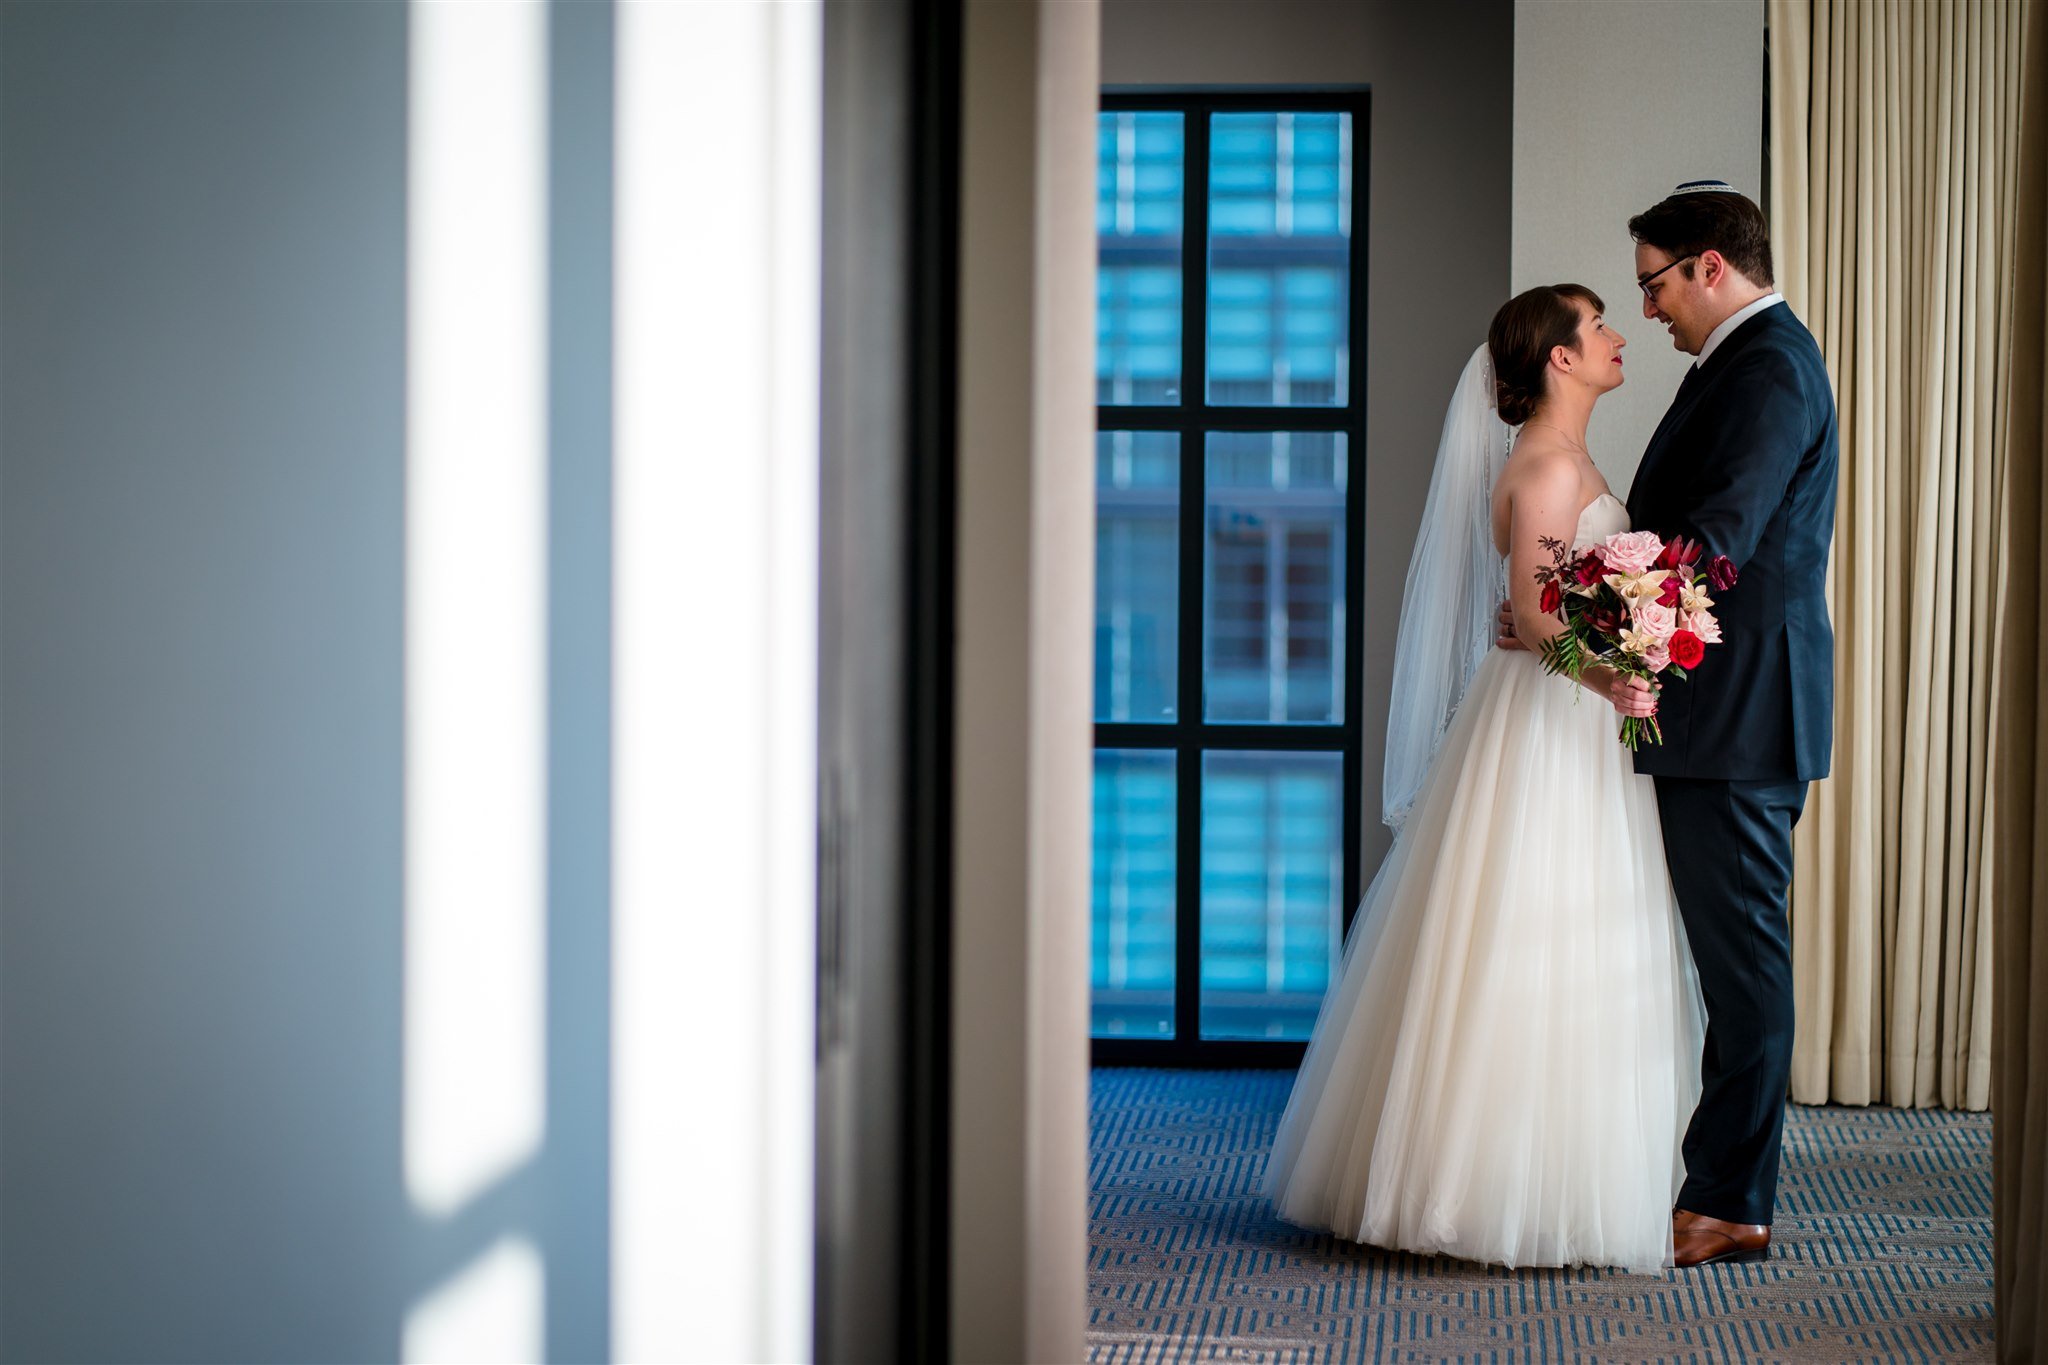 E002-Wedding-Portraits-and-Family-Formals-Intercontinental-at-the-Wharf-DC-Photography-by-Bee-Two-Sweet.jpg